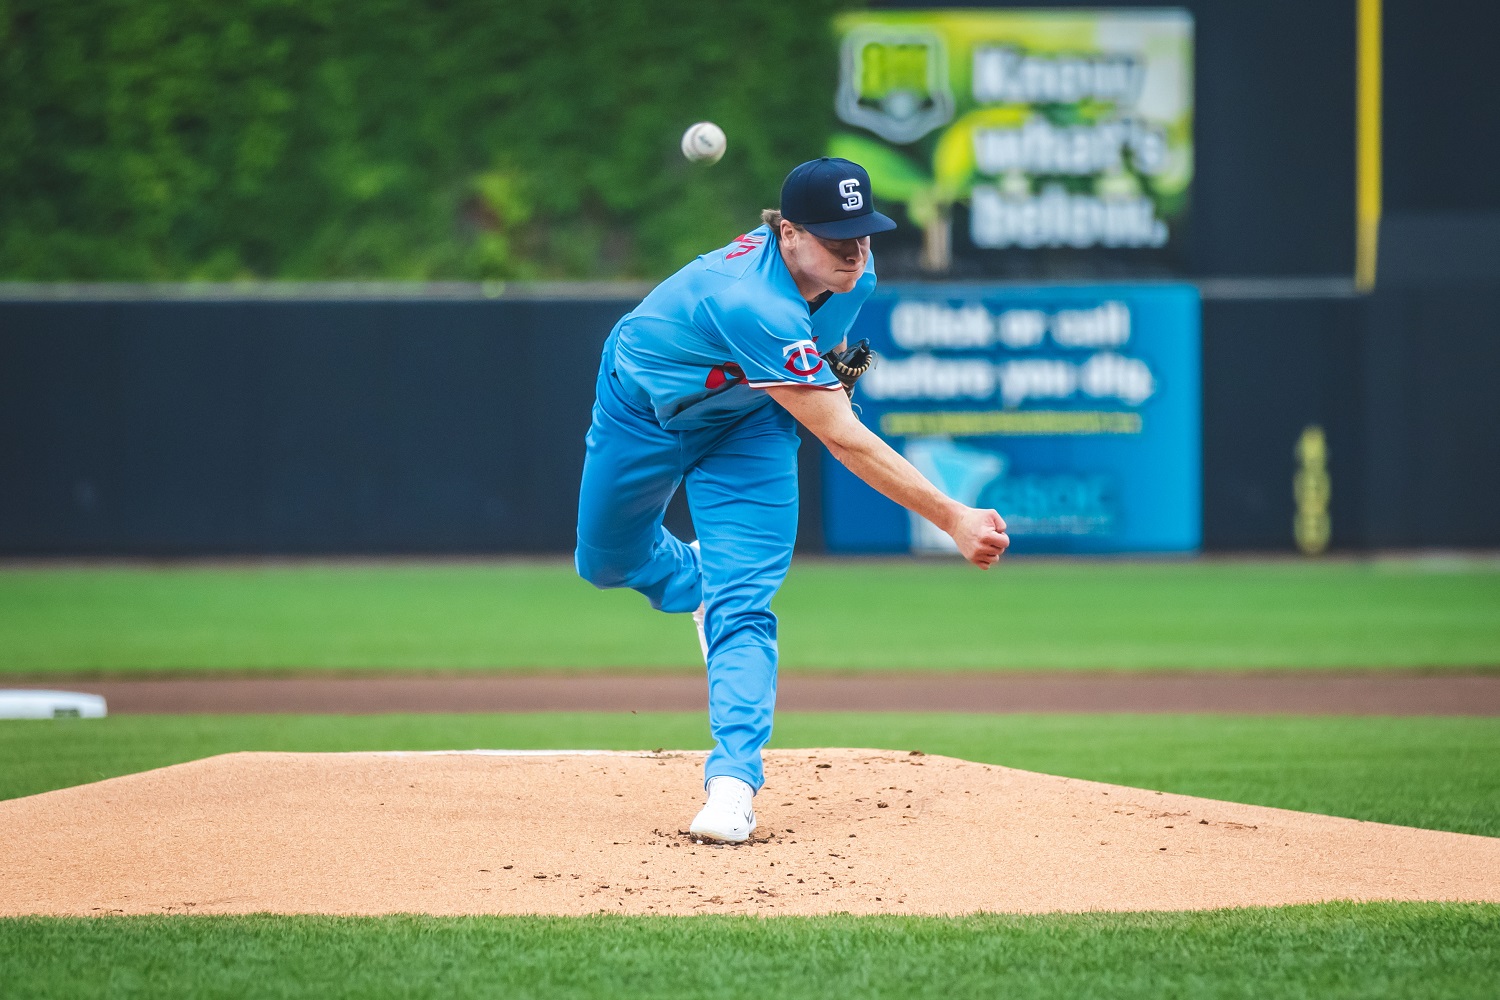 Twins Daily 2021 Minor League Starting Pitcher of the Year: Louie